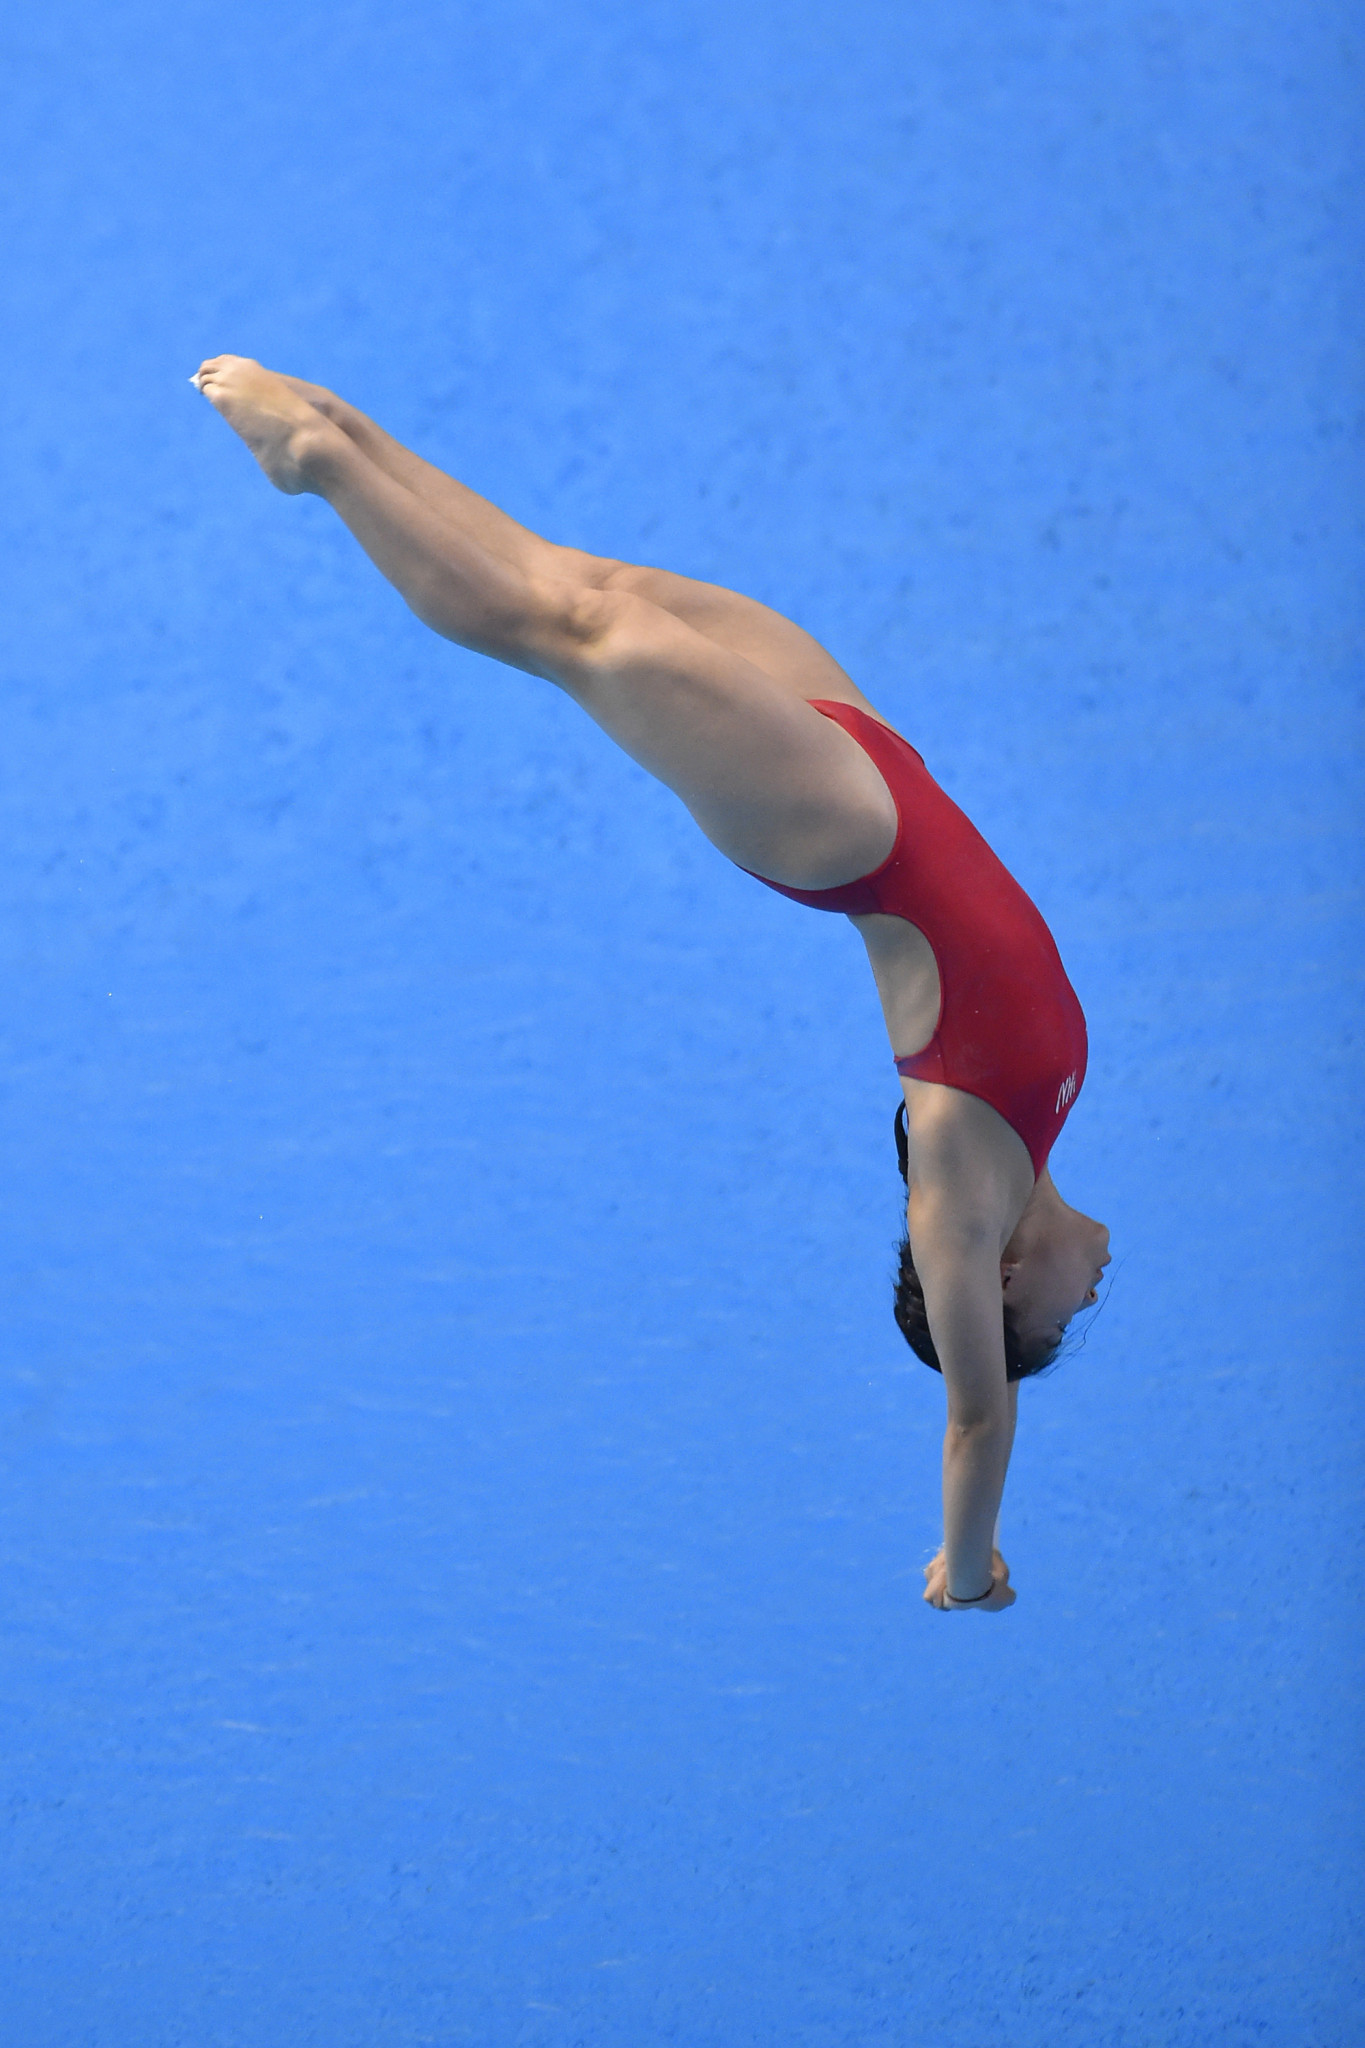 Huang Xiaohui was the winner in the women's 3m springboard competition at the FINA Diving Grand Prix event in Singapore ©Getty Images